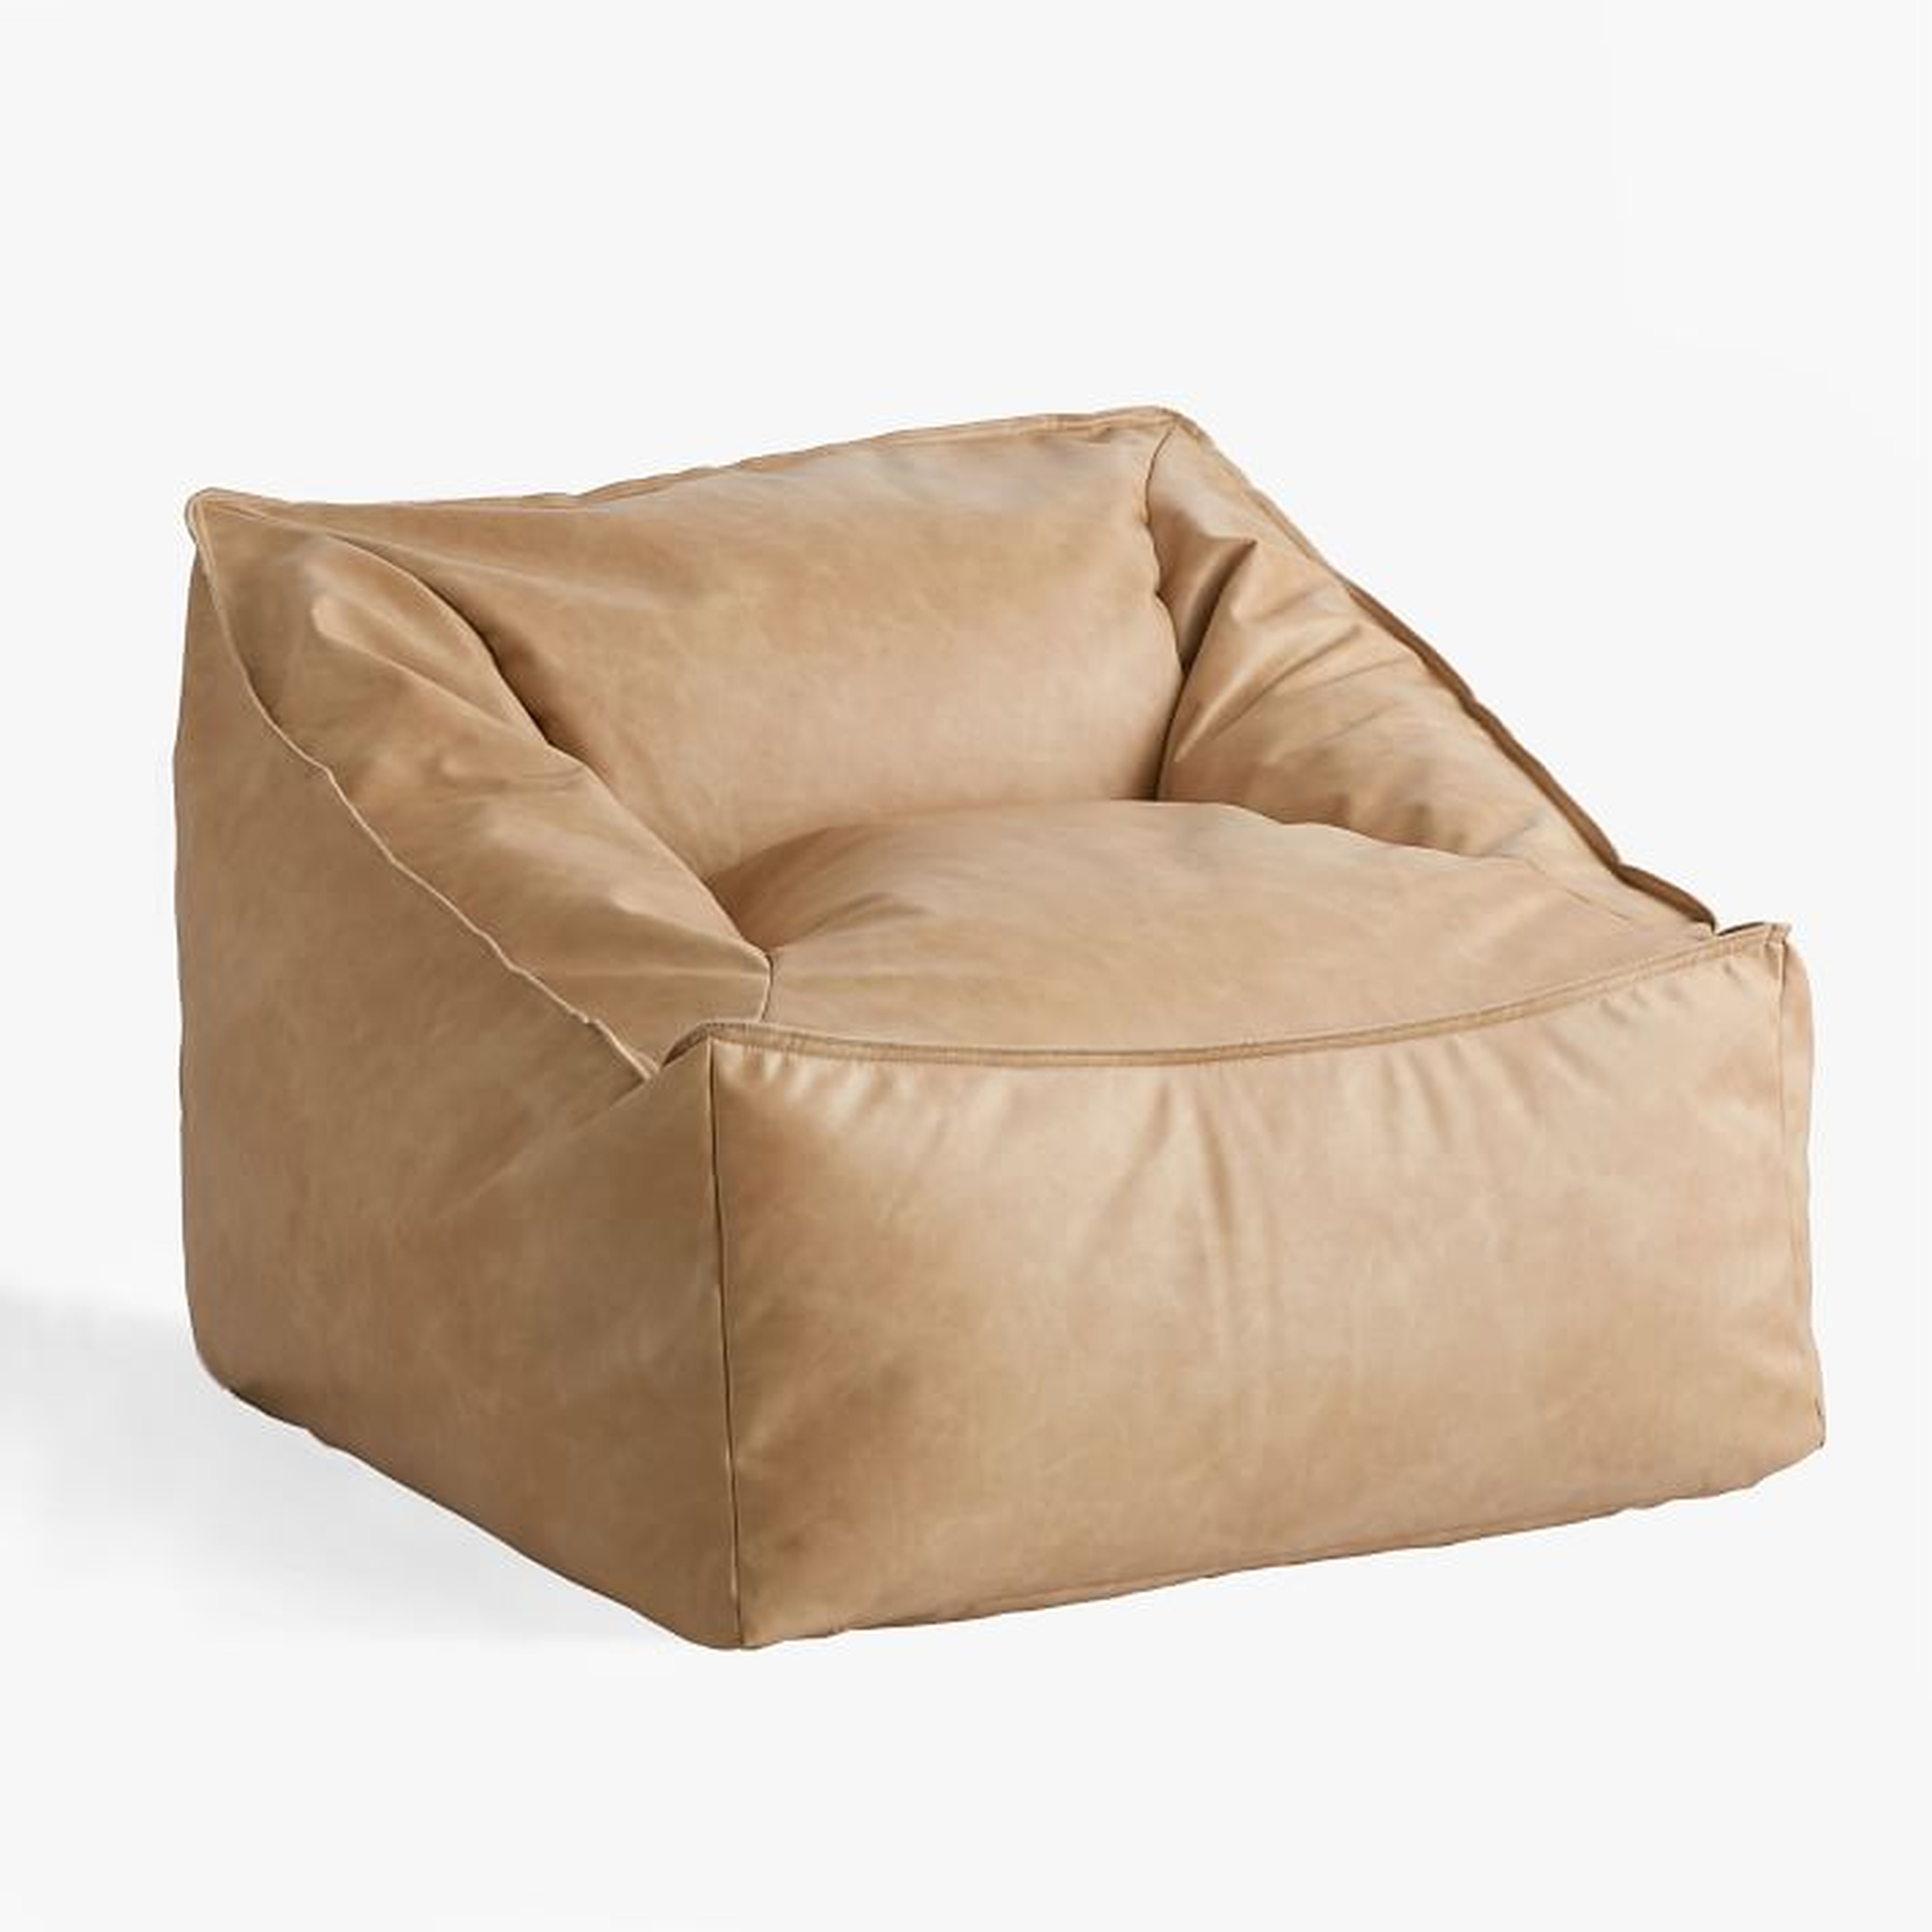 Faux Leather Modern Lounger, Cream - Pottery Barn Teen